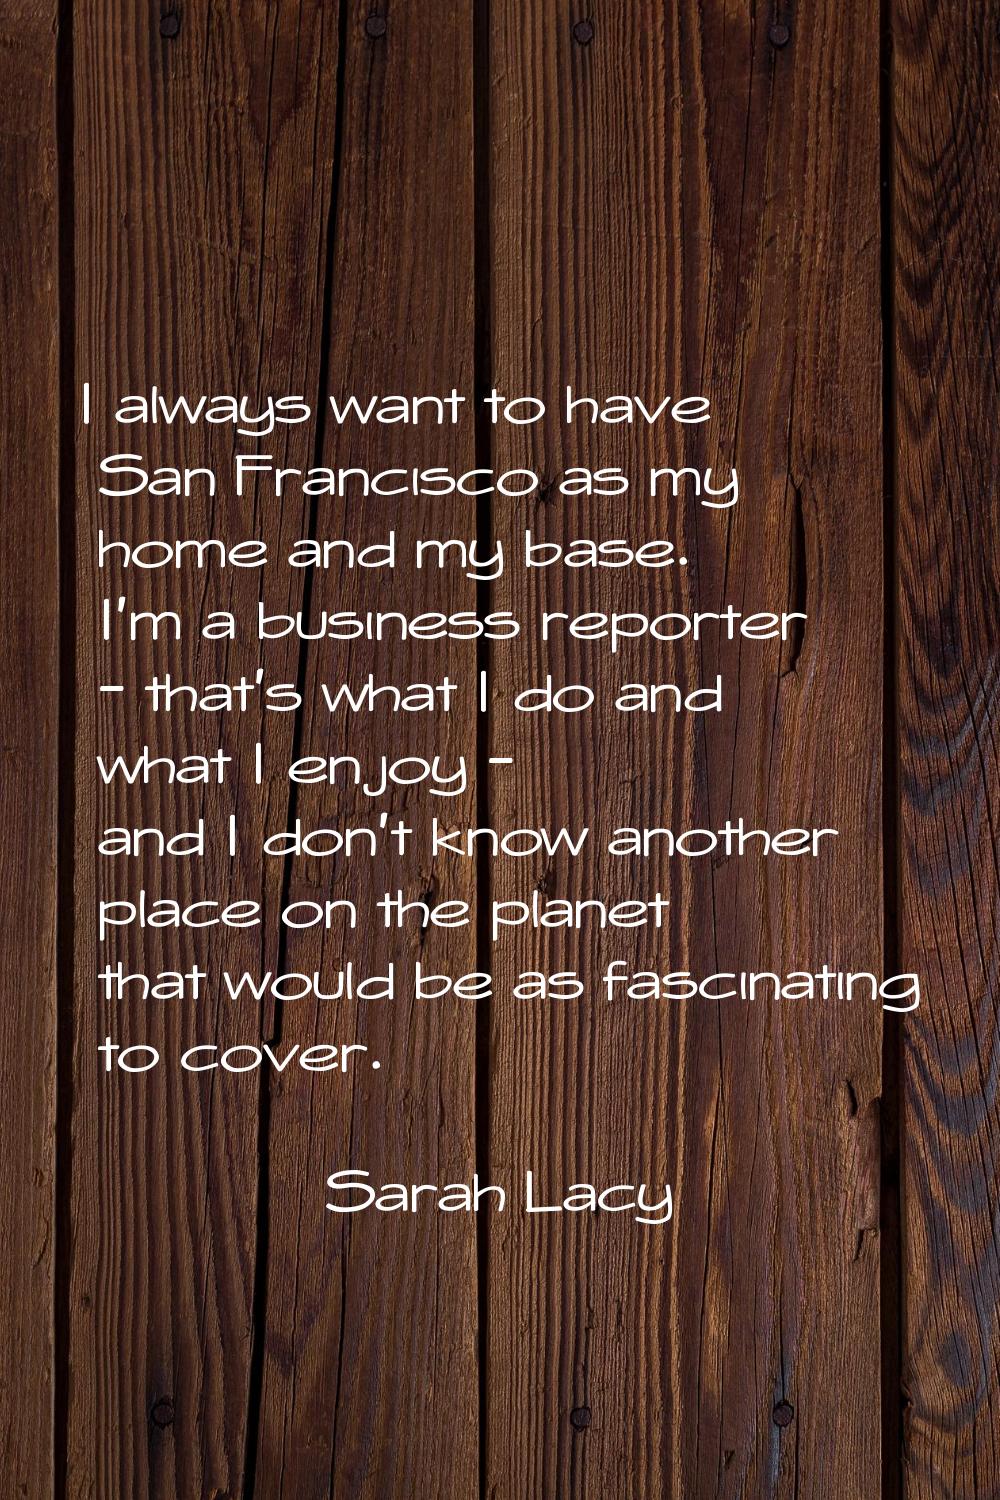 I always want to have San Francisco as my home and my base. I'm a business reporter - that's what I